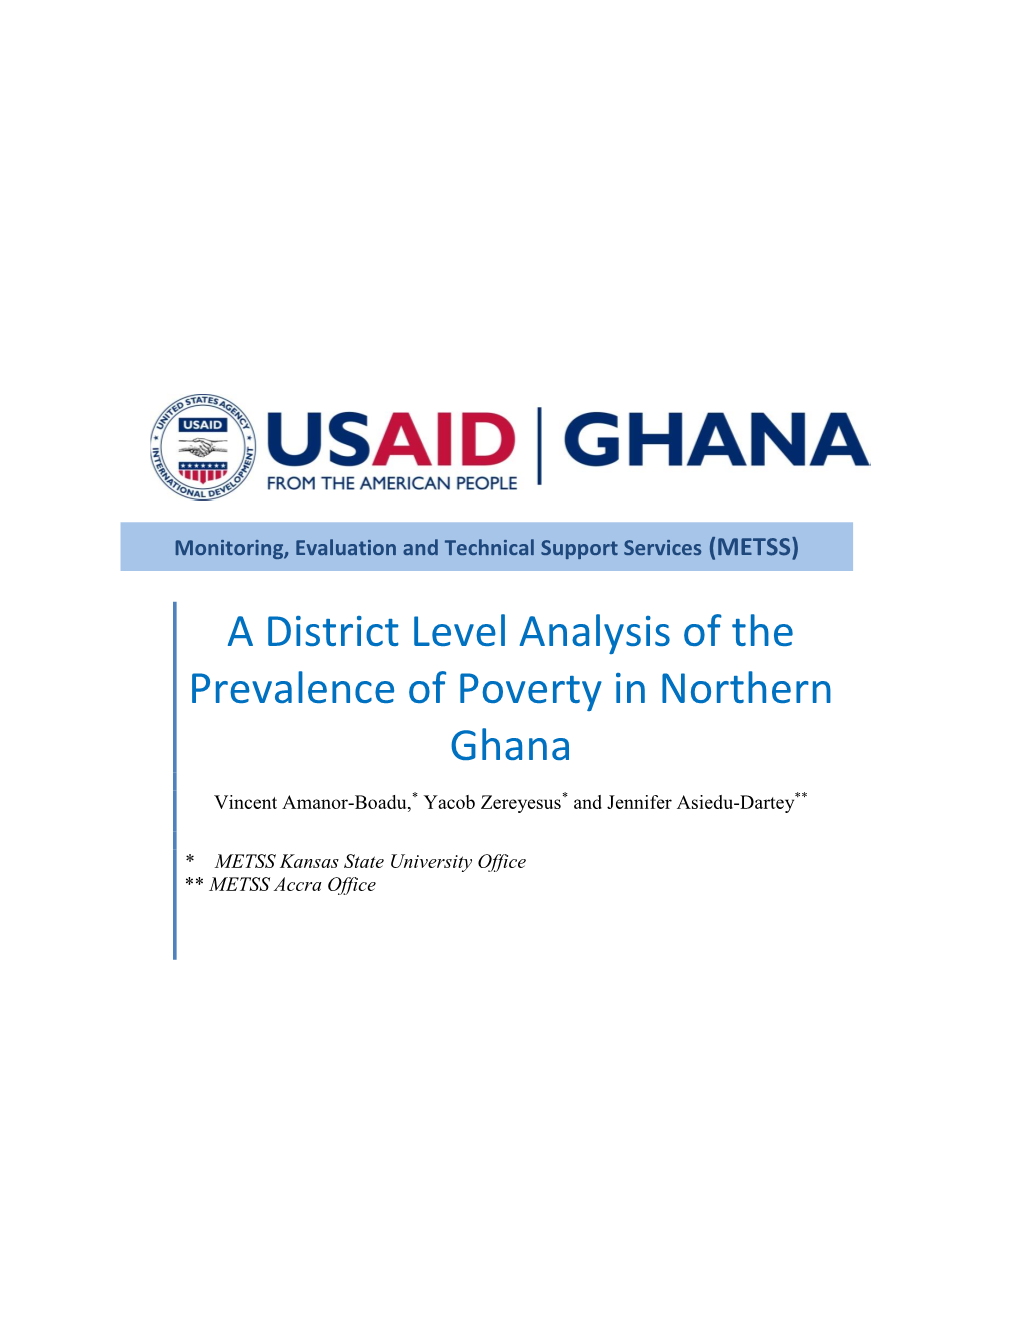 A District Level Analysis of the Prevalence of Poverty in Northern Ghana Vincent Amanor-Boadu,* Yacob Zereyesus* and Jennifer Asiedu-Dartey**